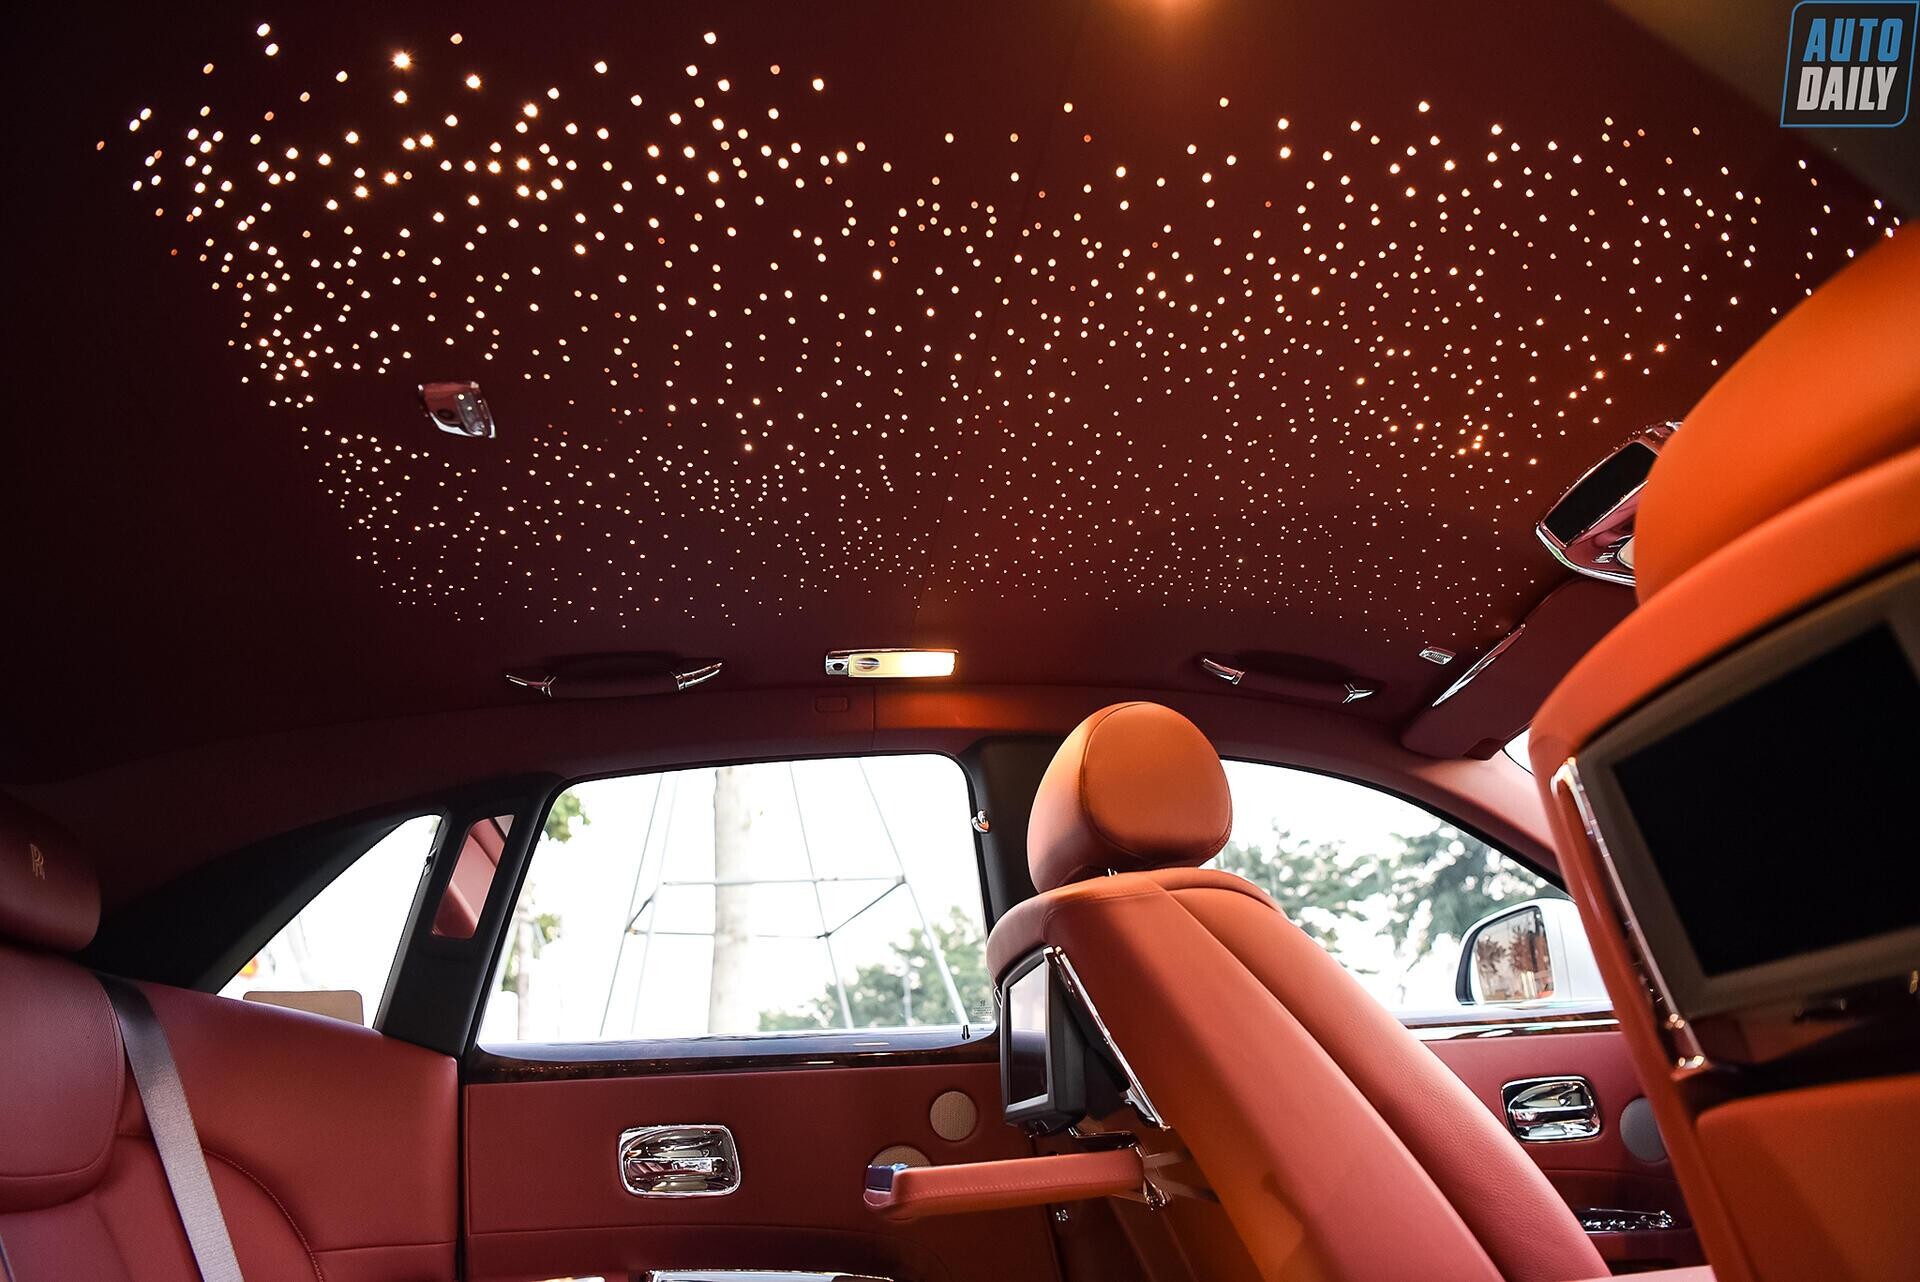 Rybrook RollsRoyce Birmingham  Why not transform the roof of your car  into the illusion of a starfilled night sky This special headlining  material creates a magical ambience using hundreds of fibre